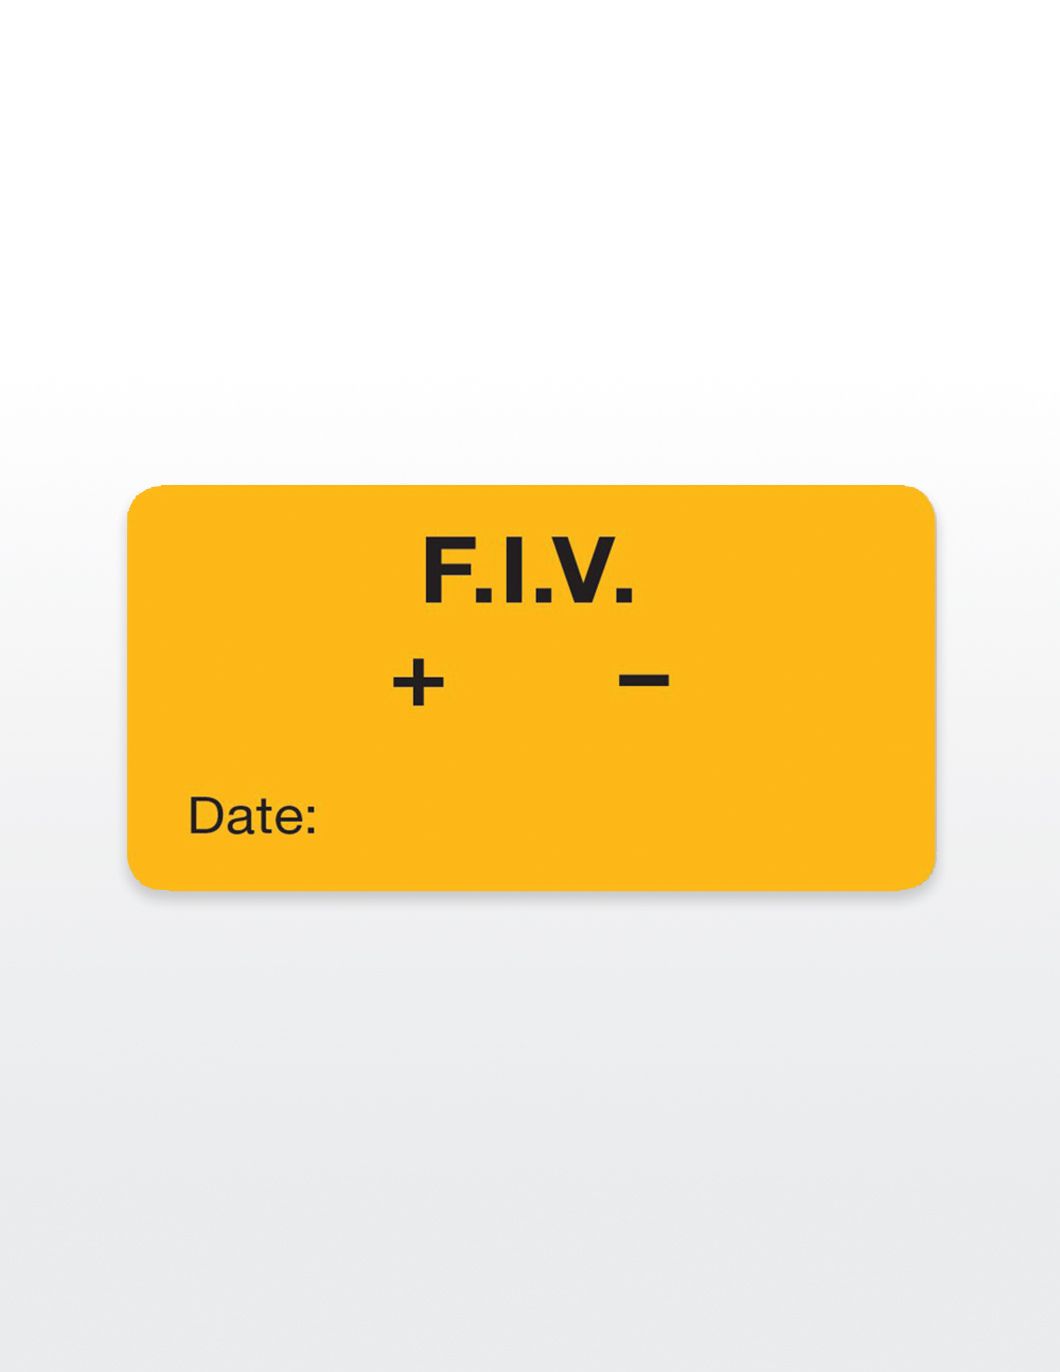 fiv-medical-record-stickers